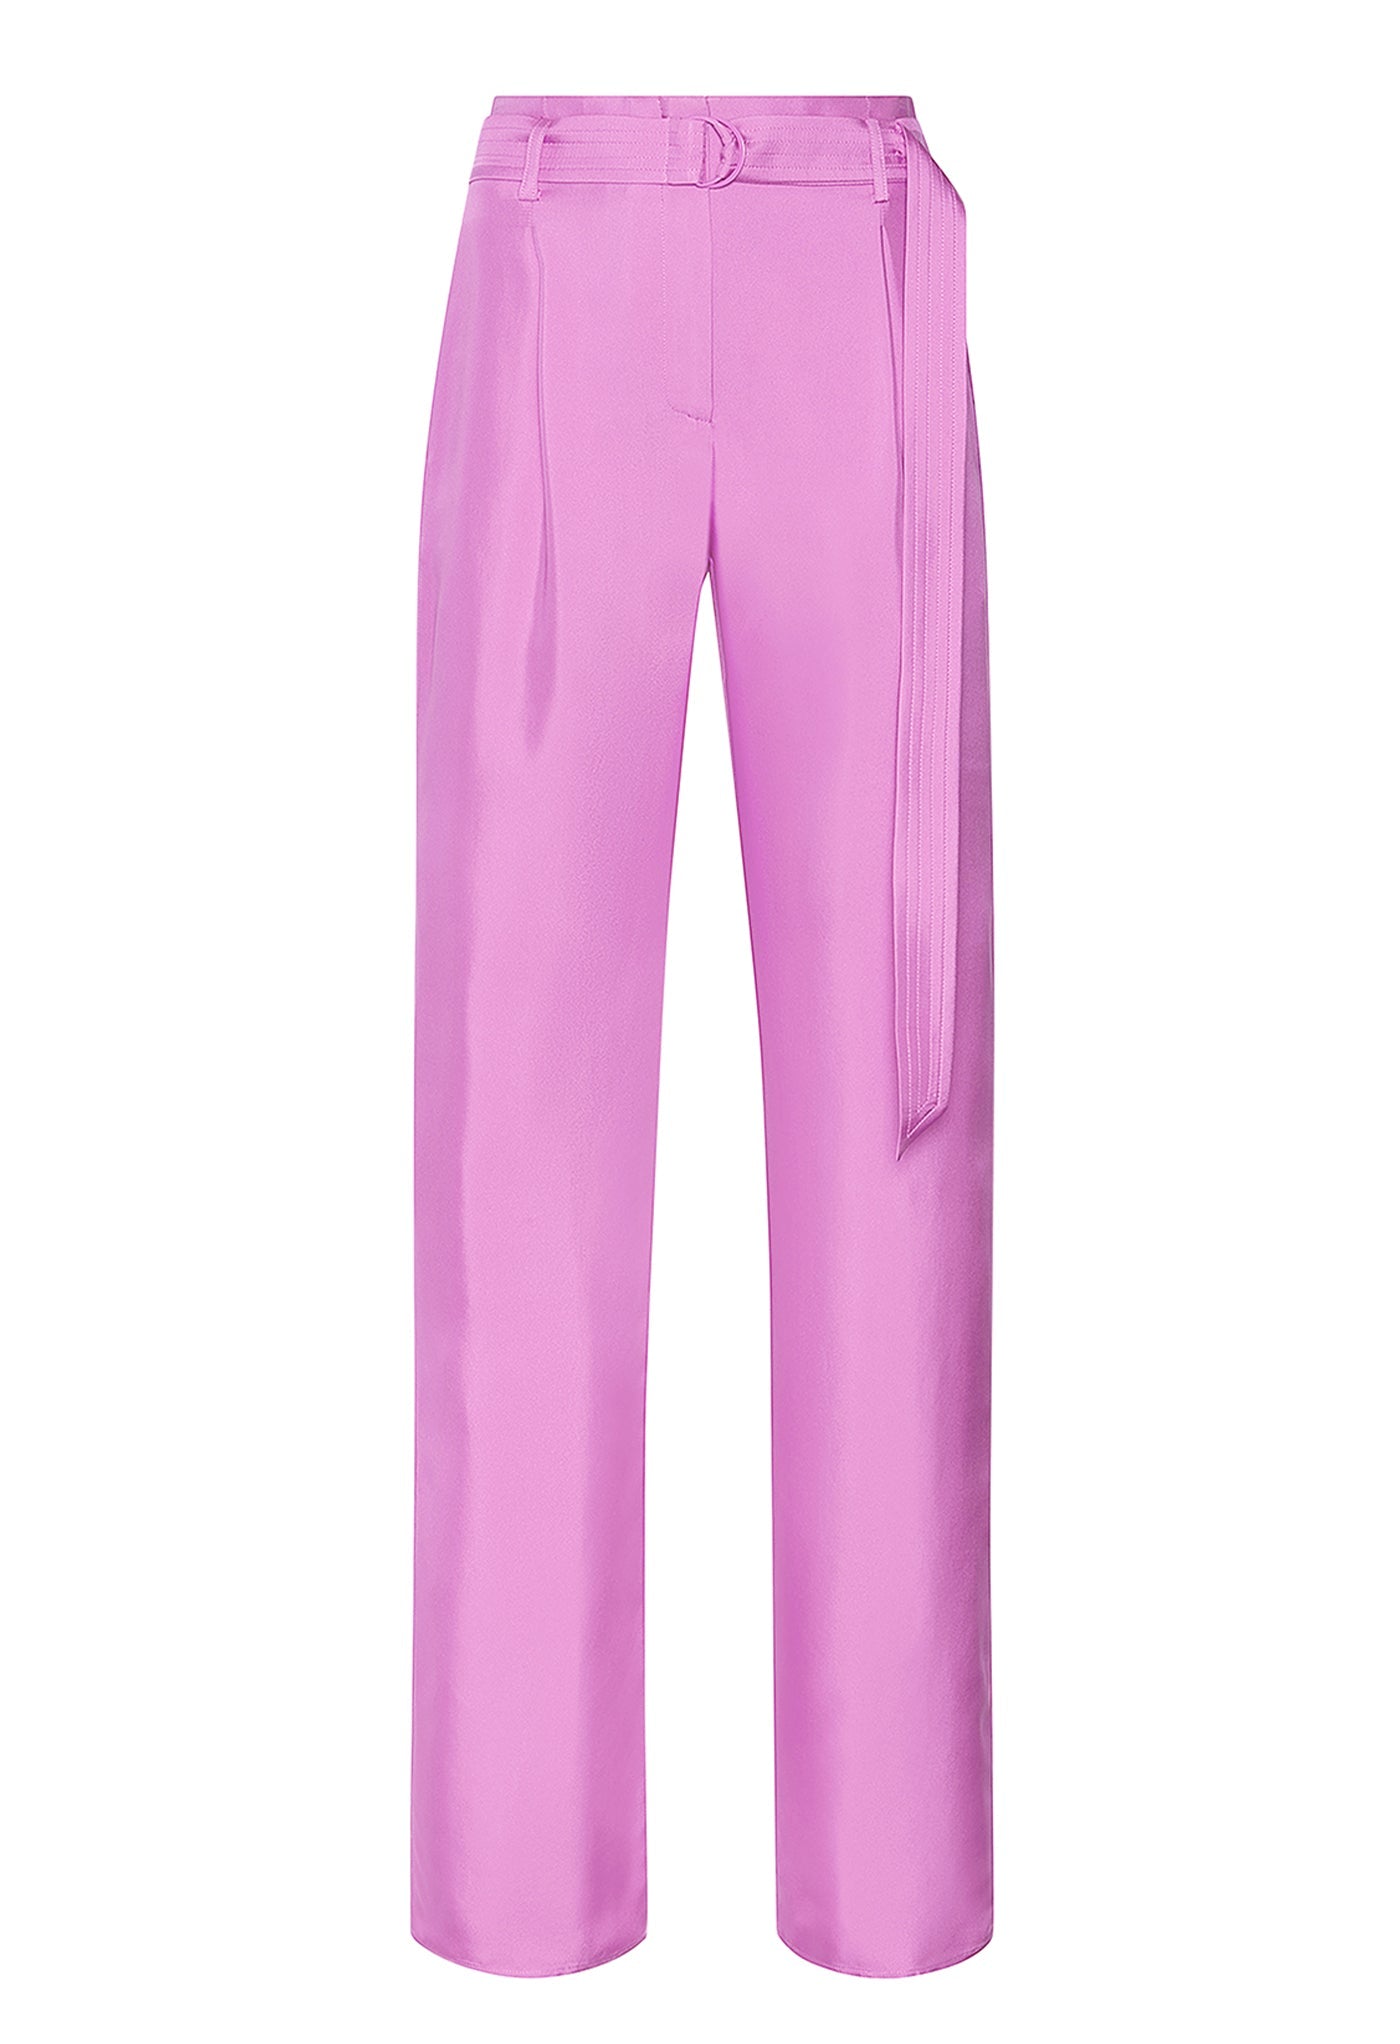 ORGANIC SILKY TWILL HIGH WAISTED BELTED PANT - LAPOINTE